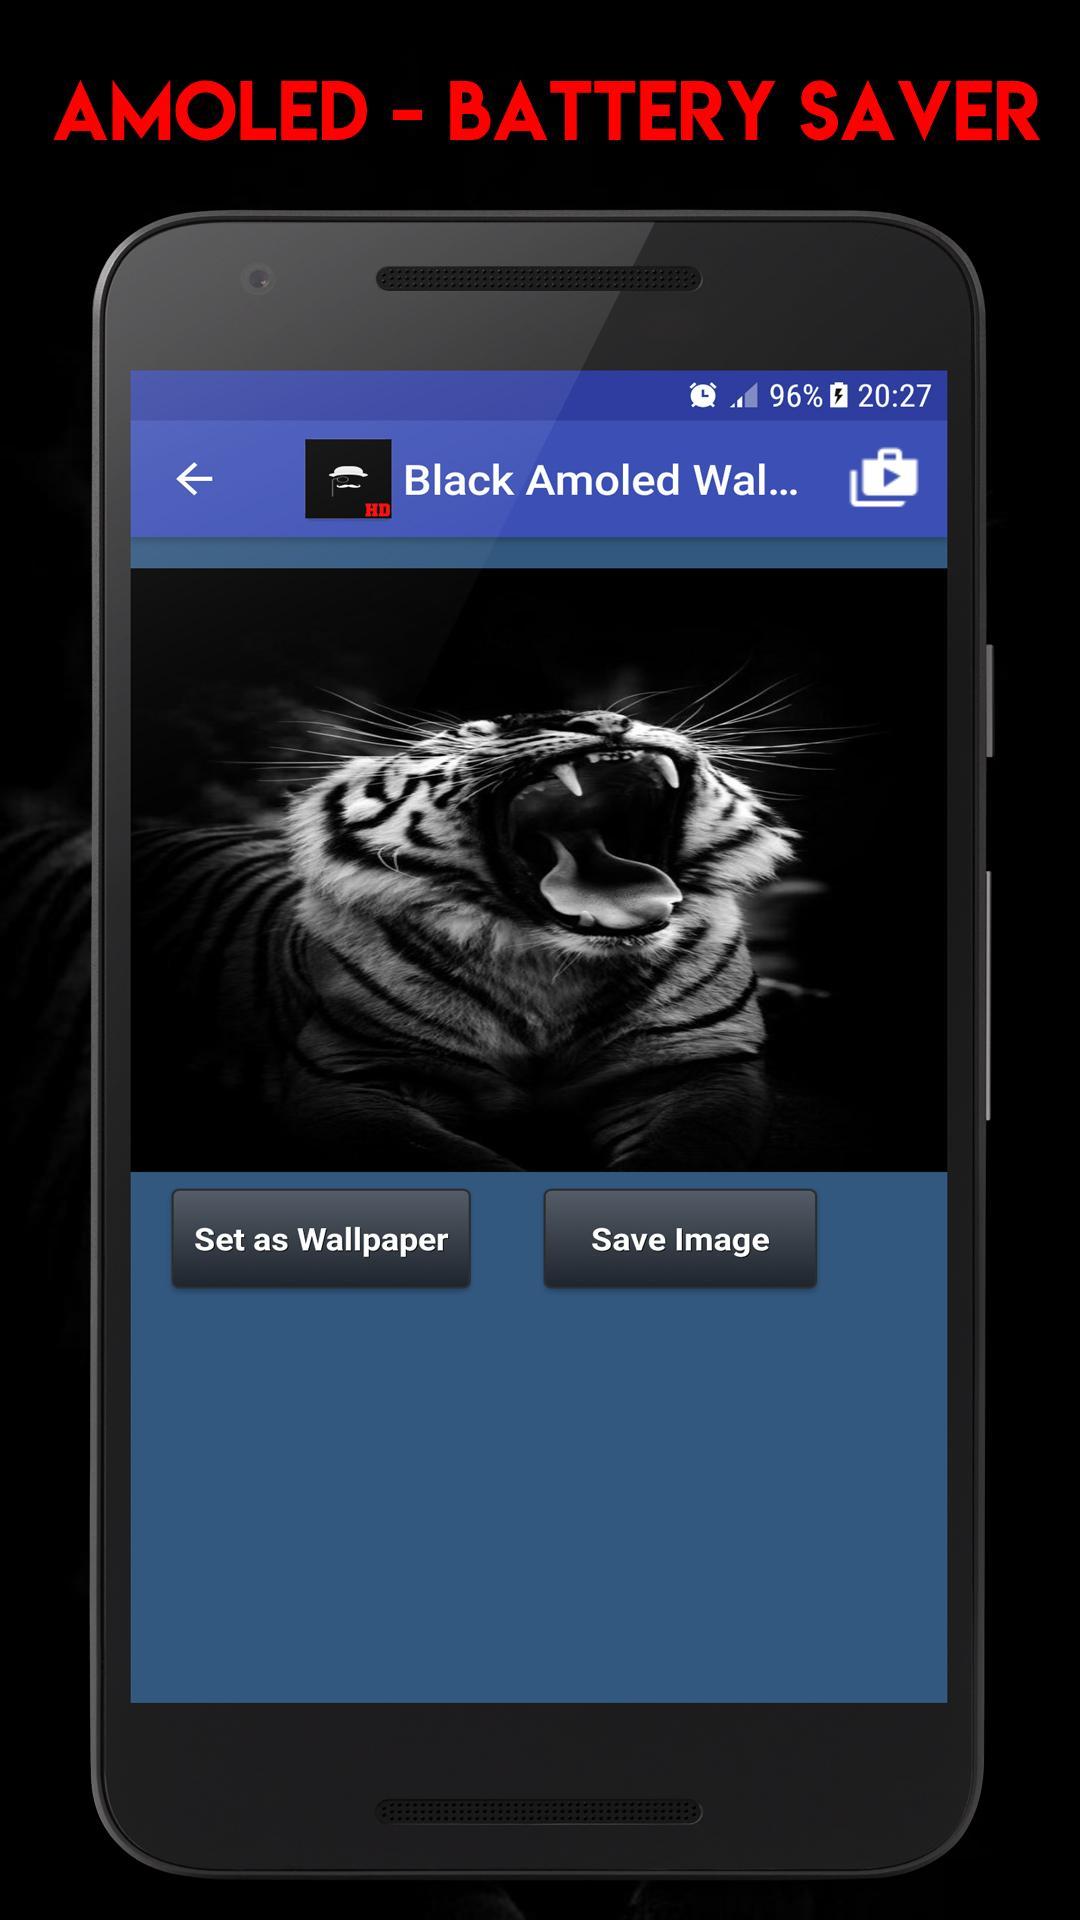 Black Amoled Wallpapers 4k for Android - APK Download